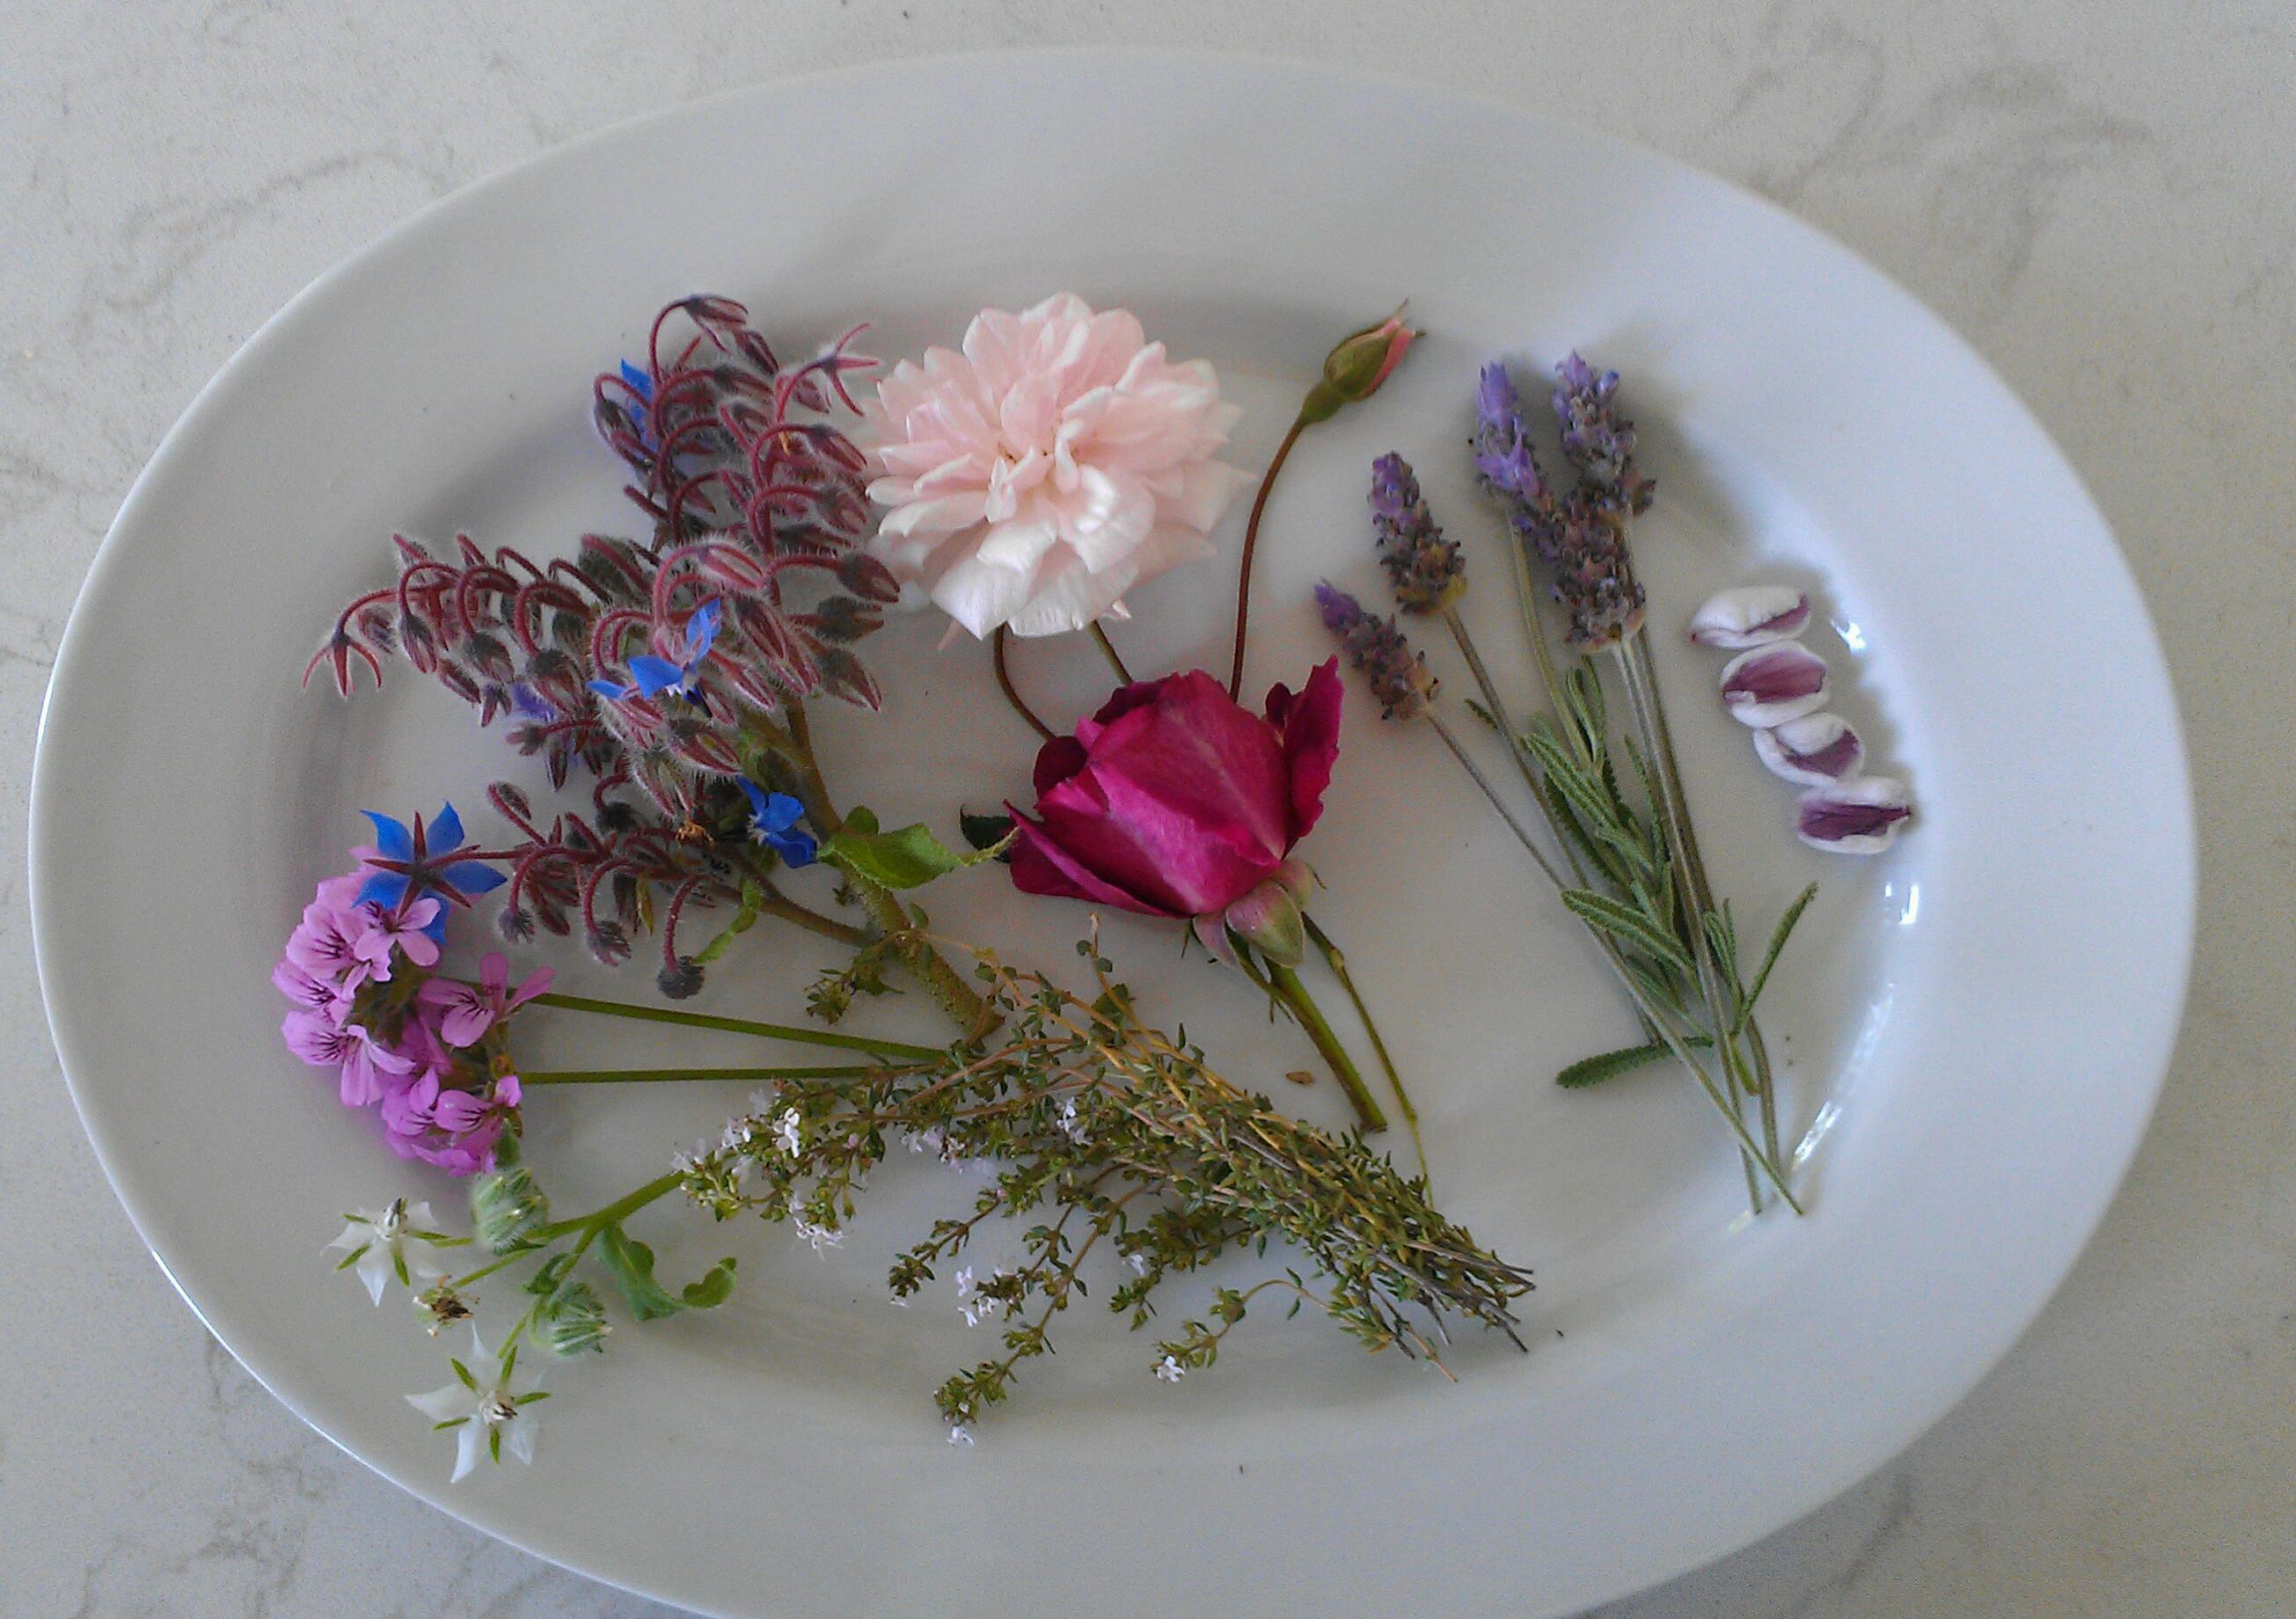 Jazz Up Your Cooking with Healthy and Tasty Edible Flowers